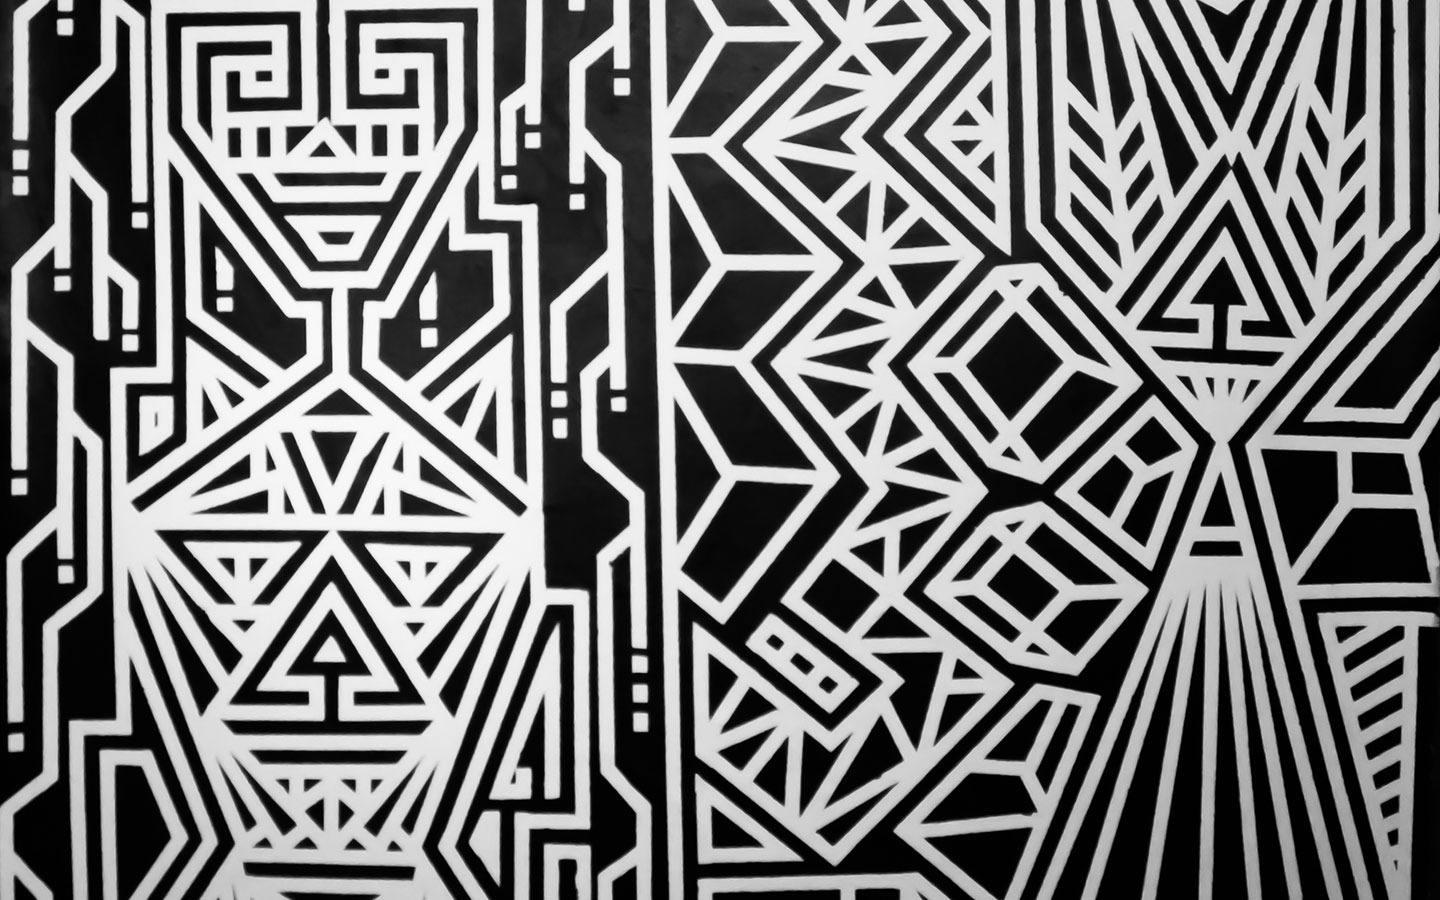 Black and white mural by Miami artist Marcus Blake